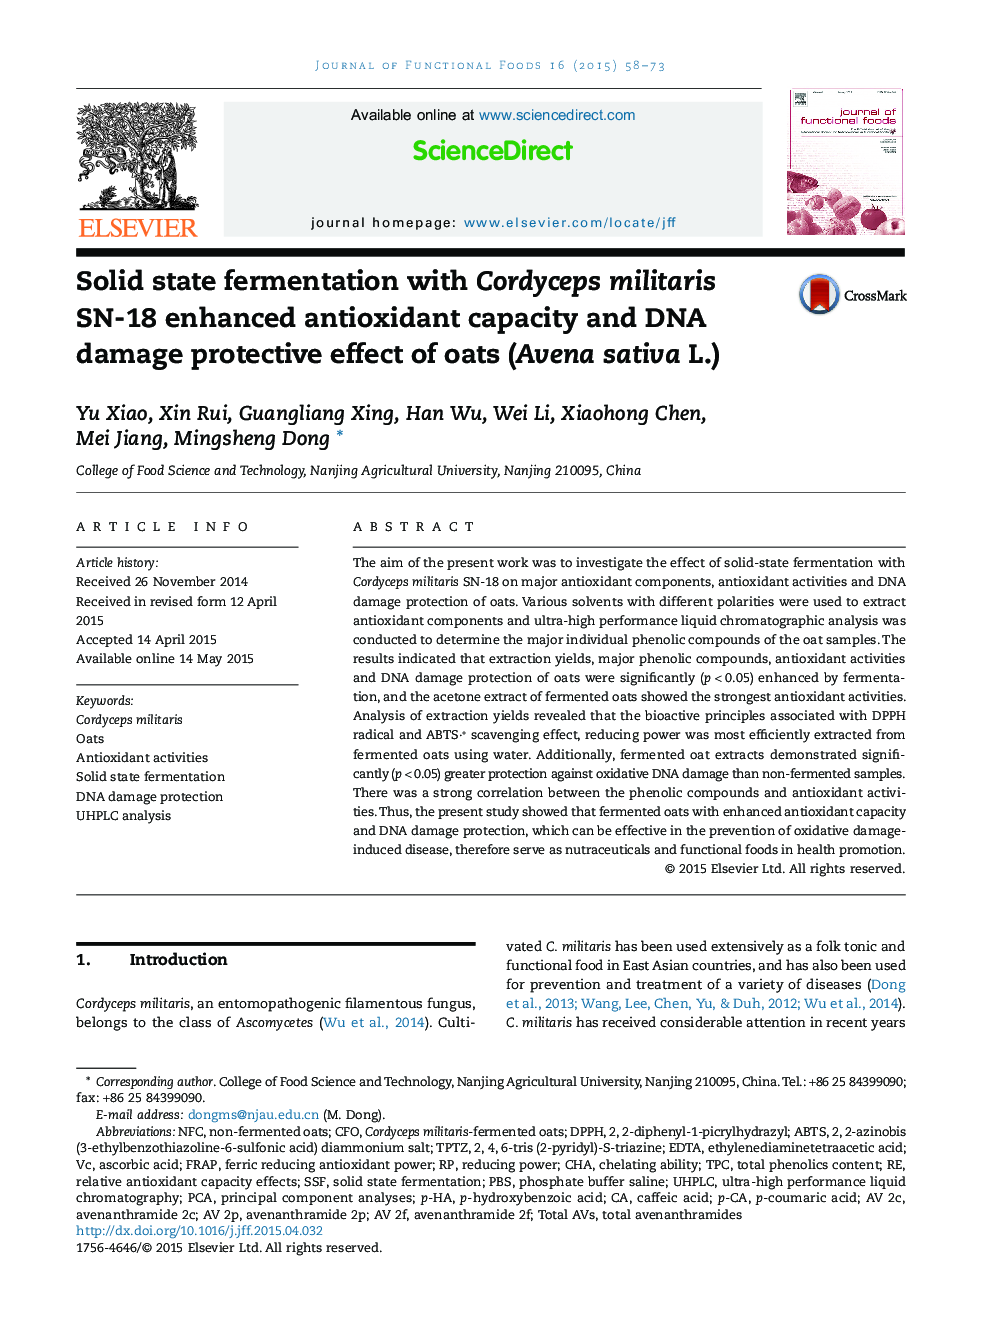 Solid state fermentation with Cordyceps militaris SN-18 enhanced antioxidant capacity and DNA damage protective effect of oats (Avena sativa L.)